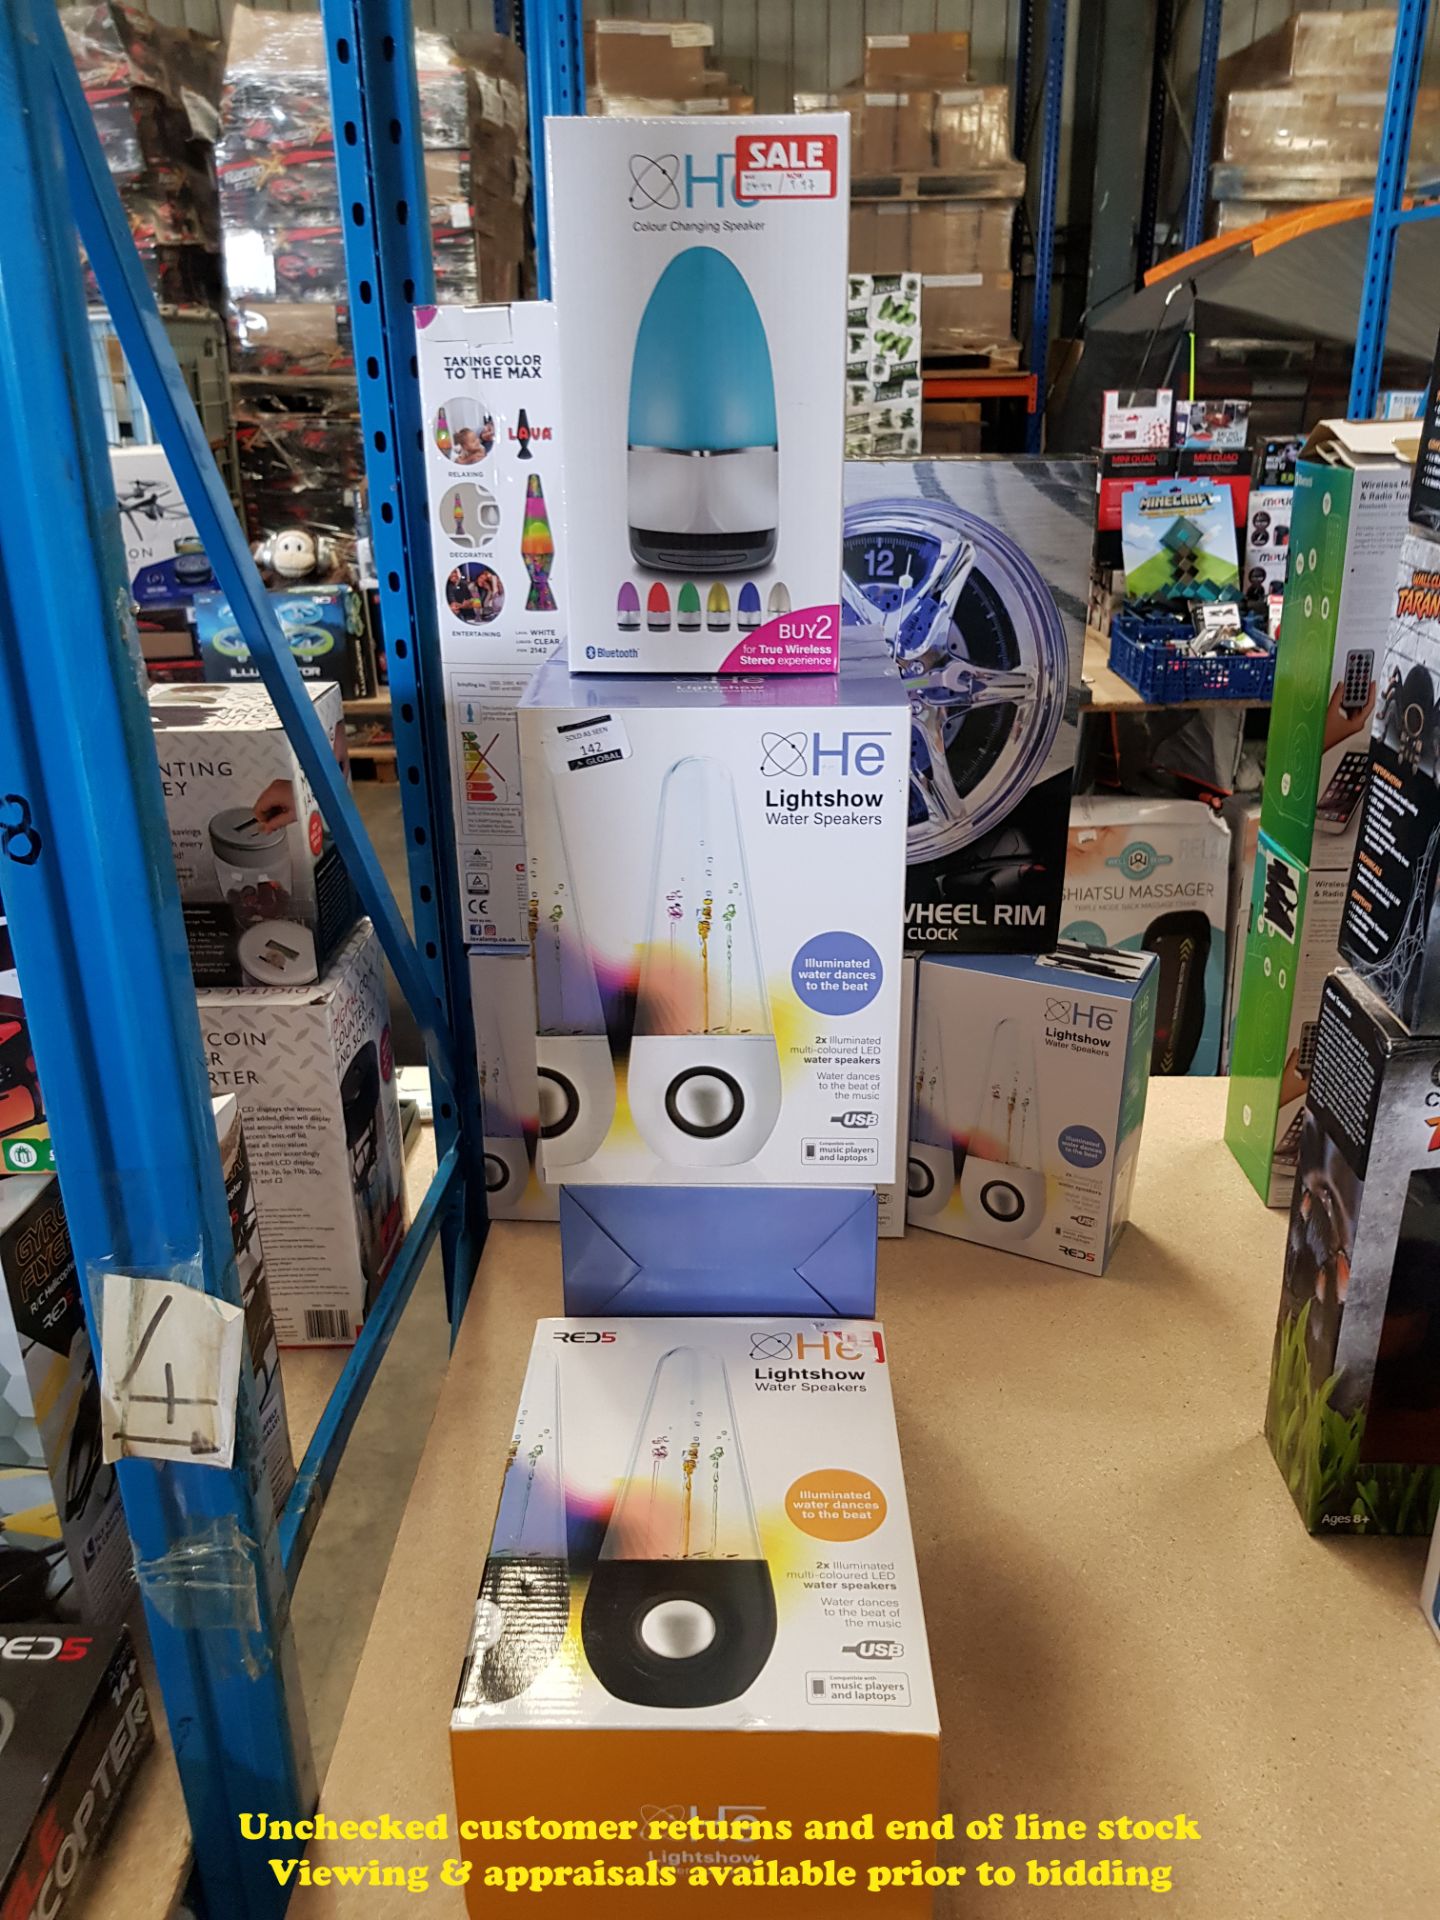 8 ITEMS – 7 X HE LIGHTSHOW WATER SPEAKERS & 1 X HE COLOUR CHANGING SPEAKER